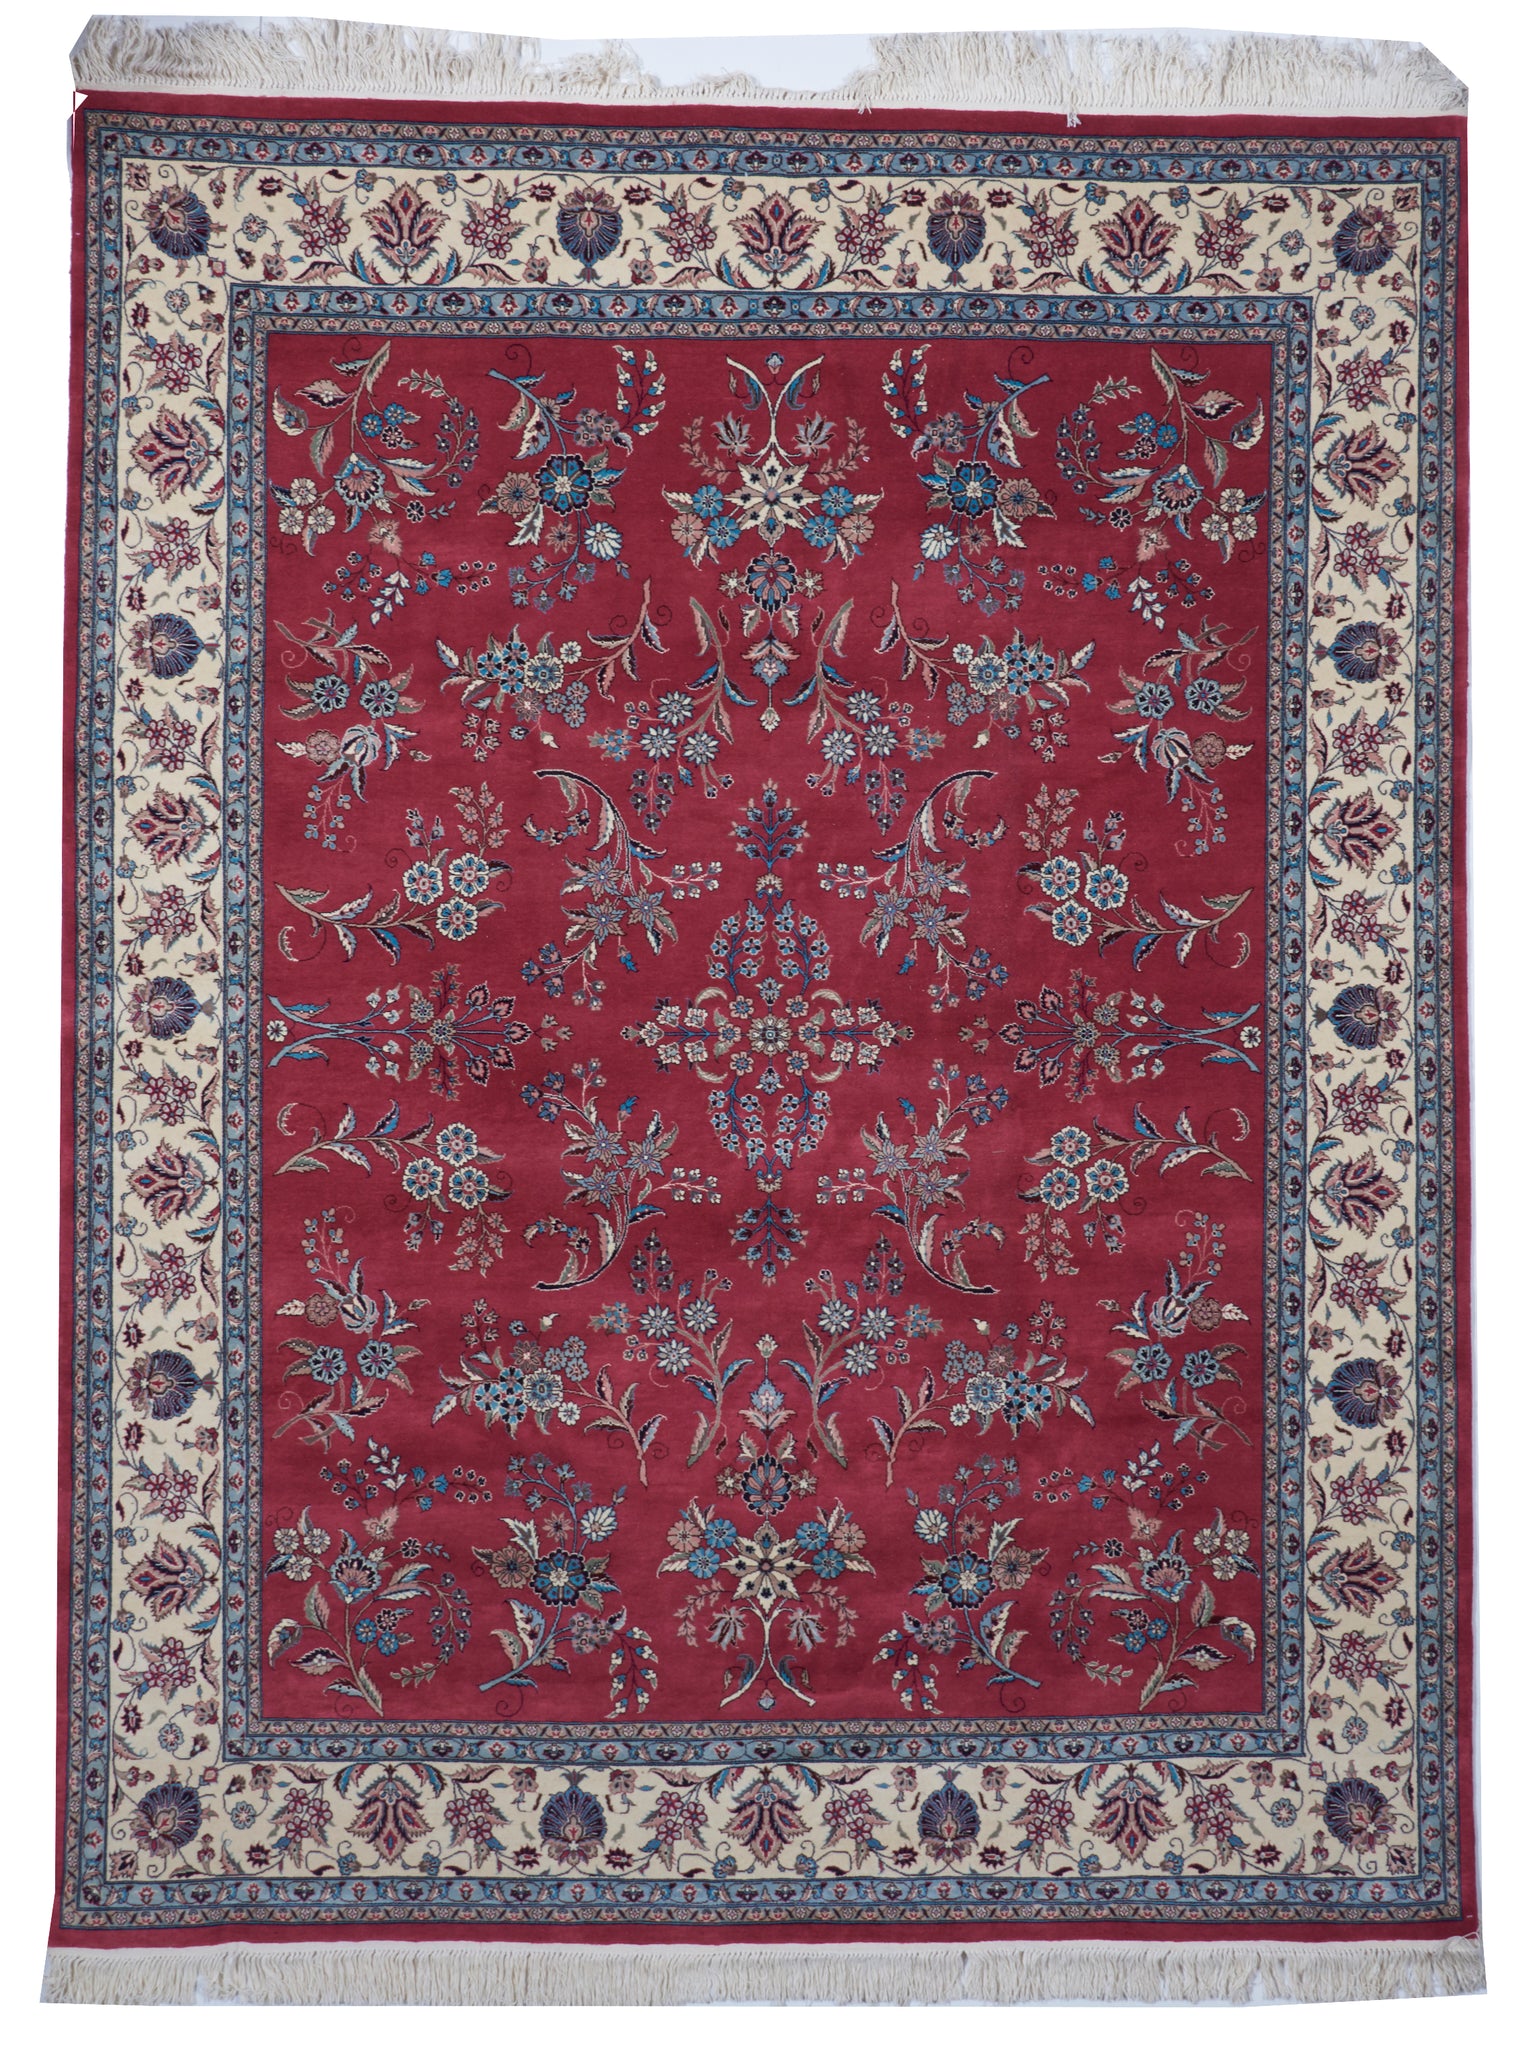 Traditional Hand Knotted Red Multicolor Wool Rug 7'11 x 10'3 - IGotYourRug